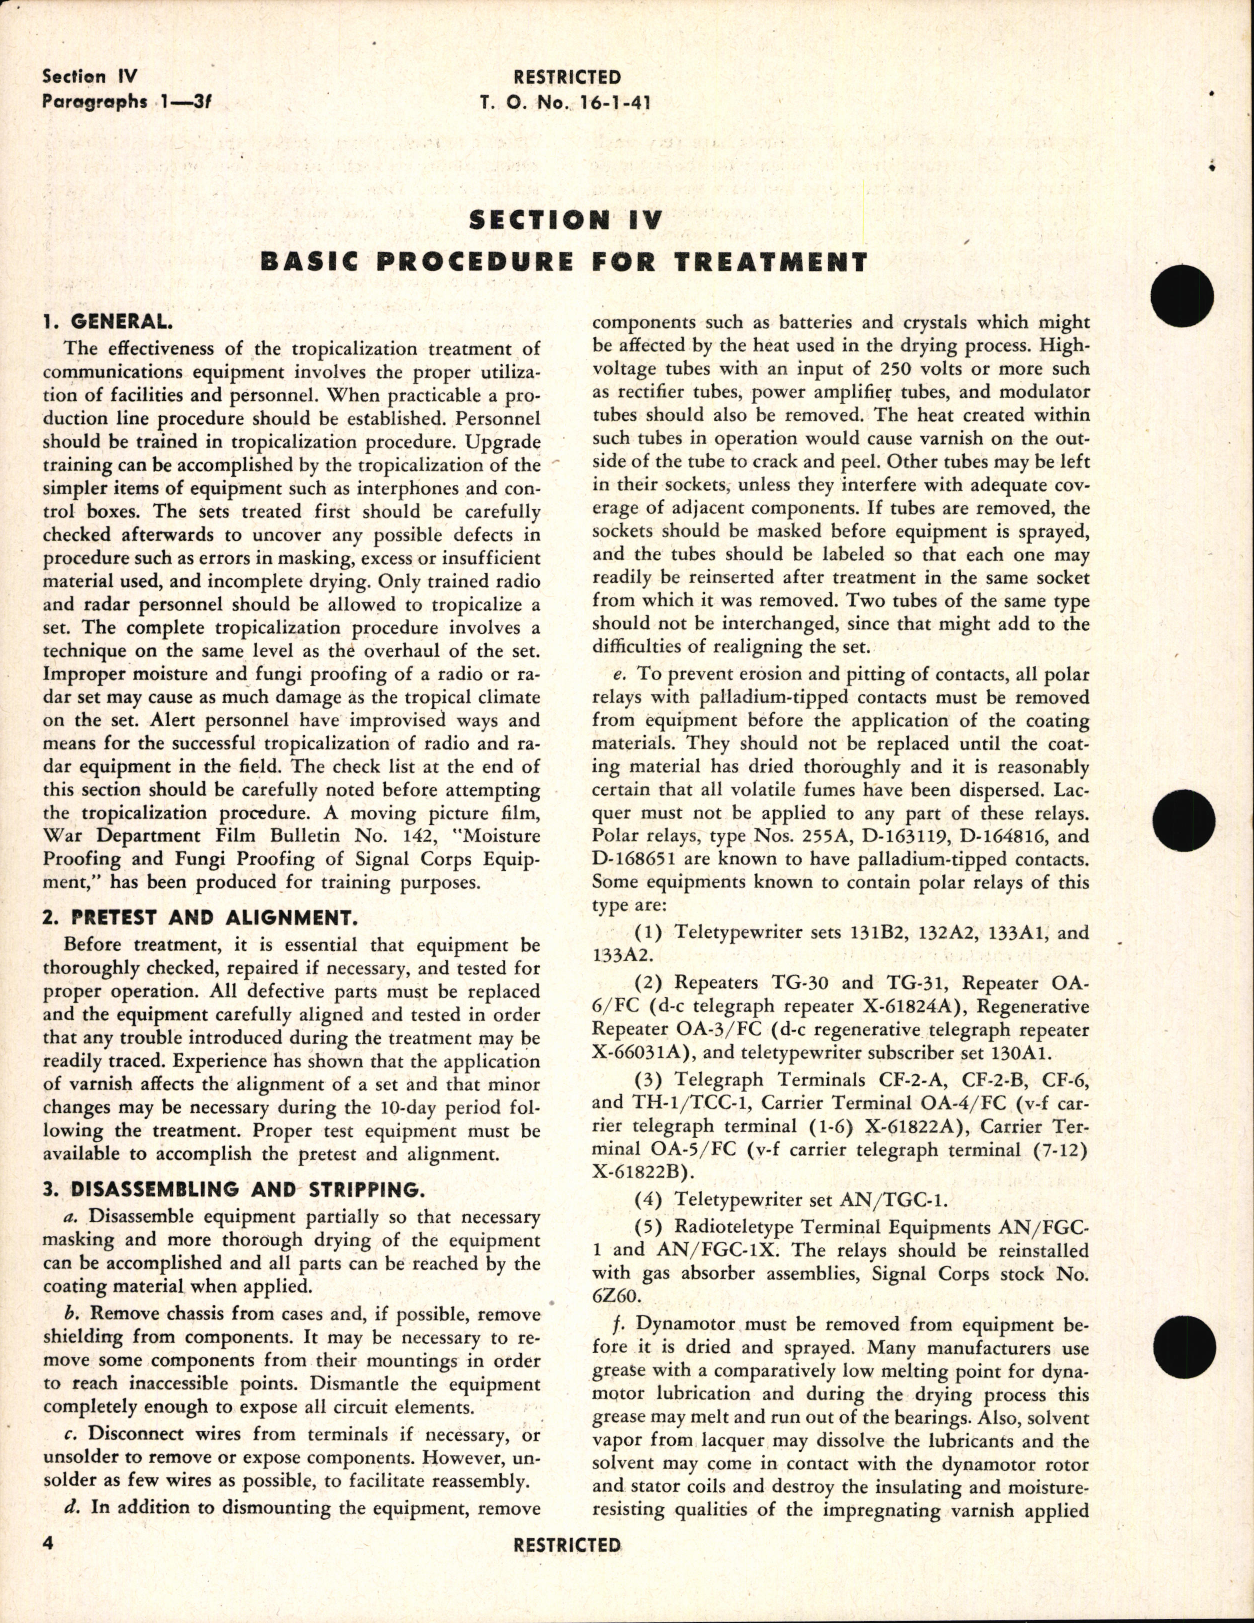 Sample page 8 from AirCorps Library document: General Instructions for Tropicalization of Communications Equipment